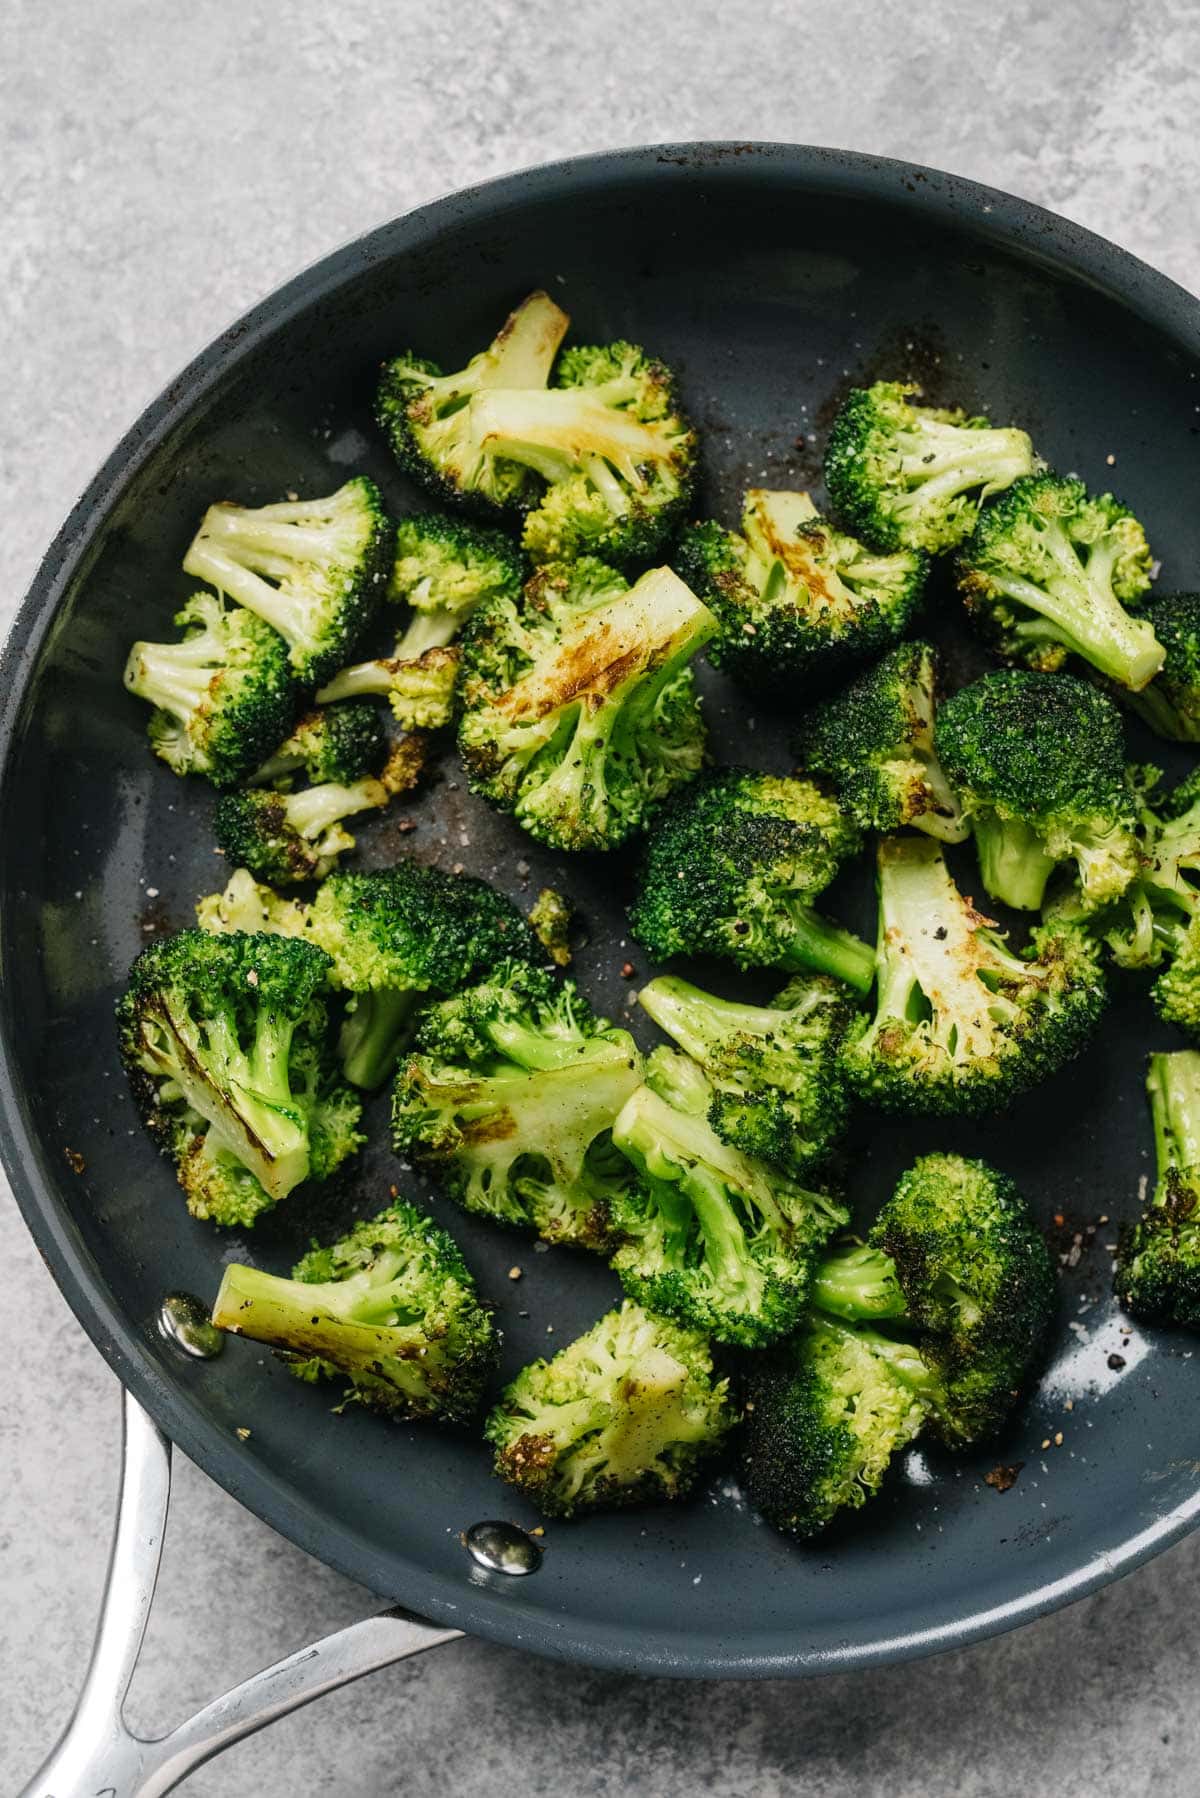 From overhead, sautéed broccoli in a skillet with olive oil and garlic.